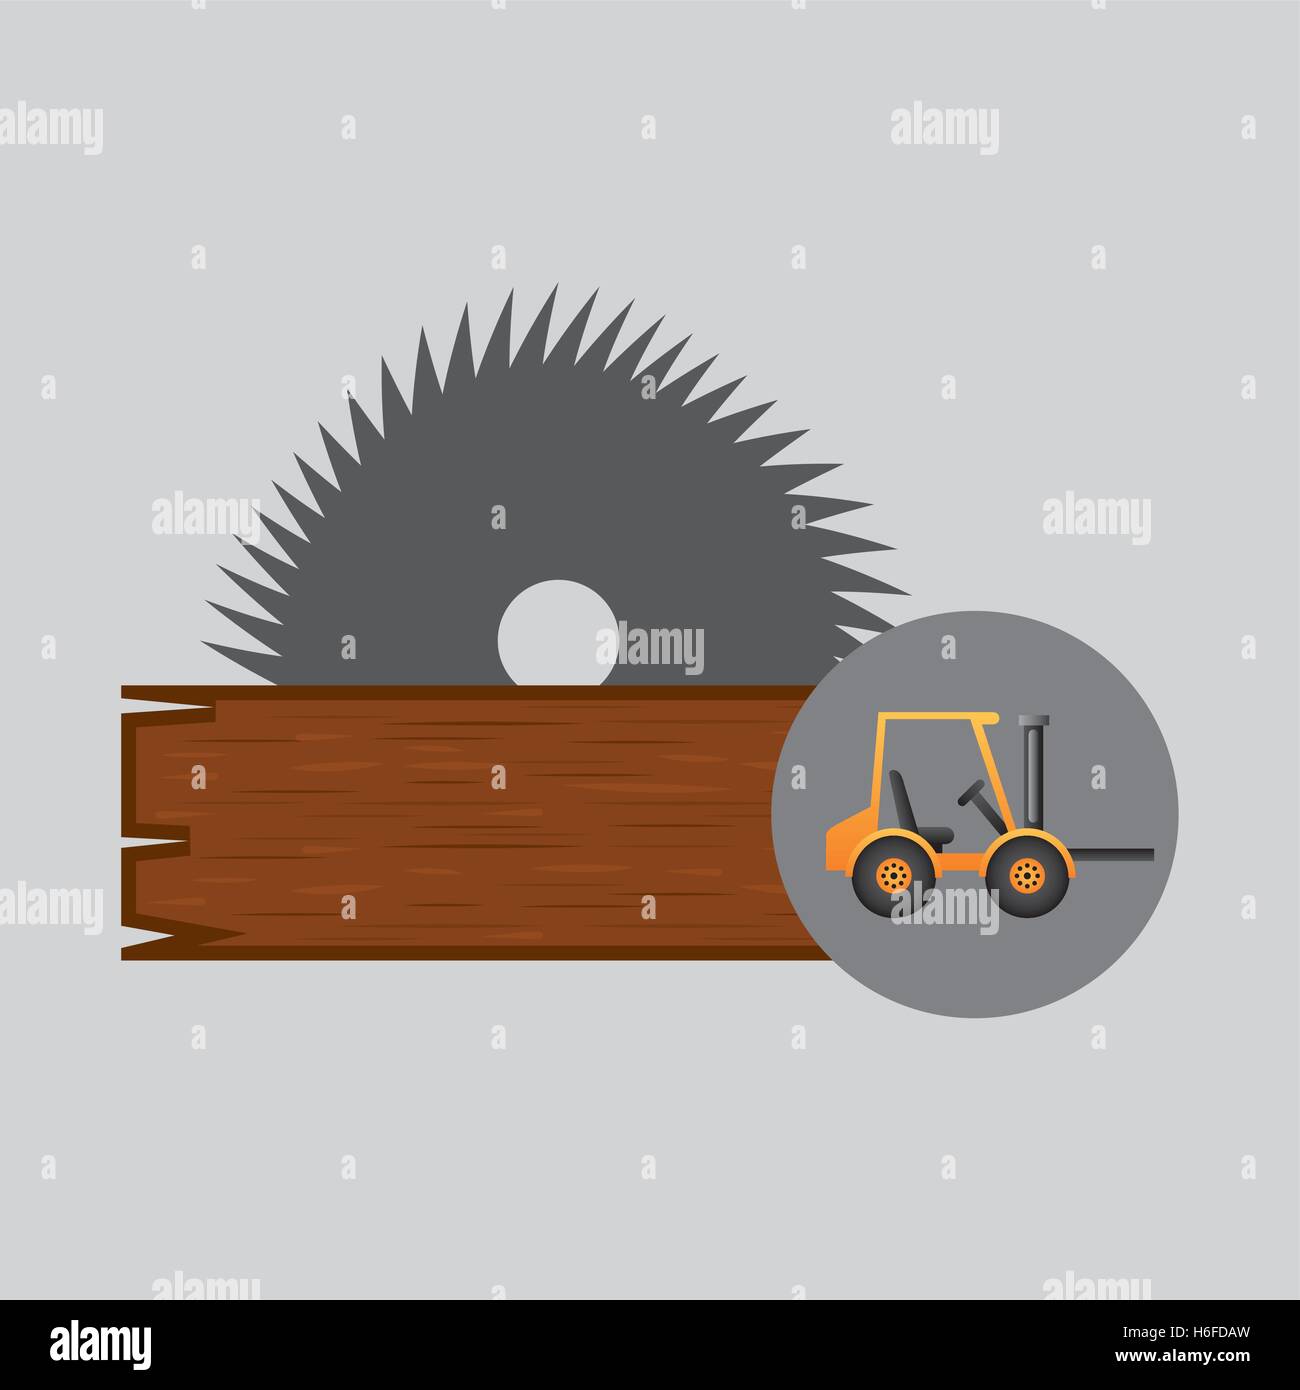 forklift truck construction sawmill icon graphic vector illustration eps 10 Stock Vector